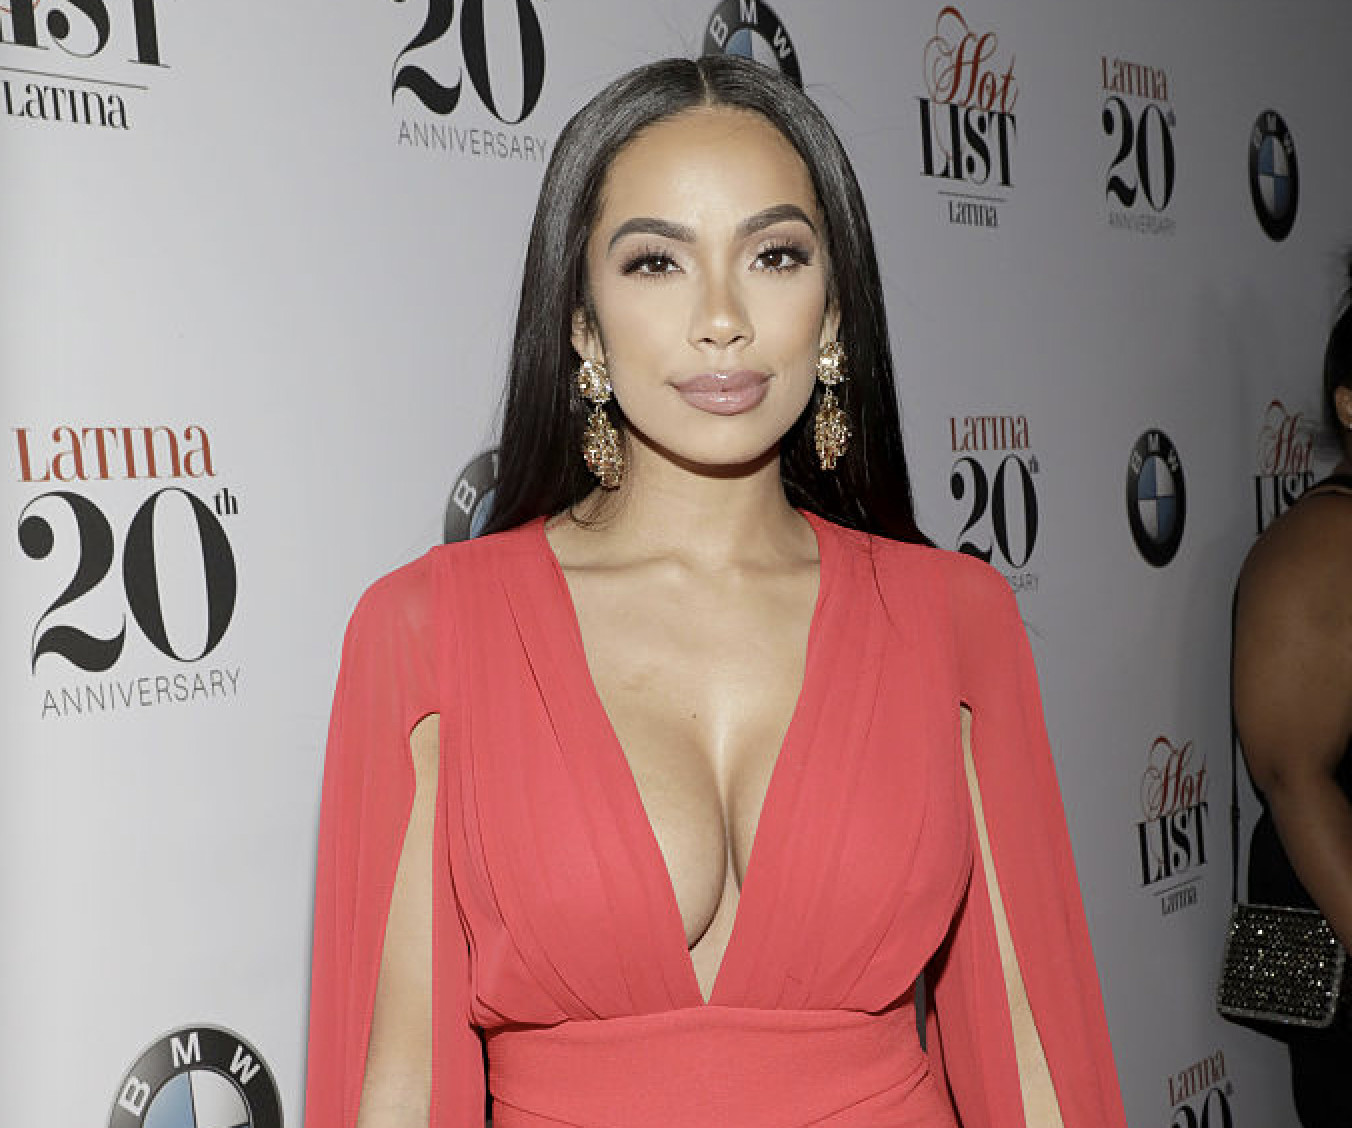 Erica Mena Brutally Slanders Alleged “Prostitute” Who’s Talking To One Of Her Baby Daddys